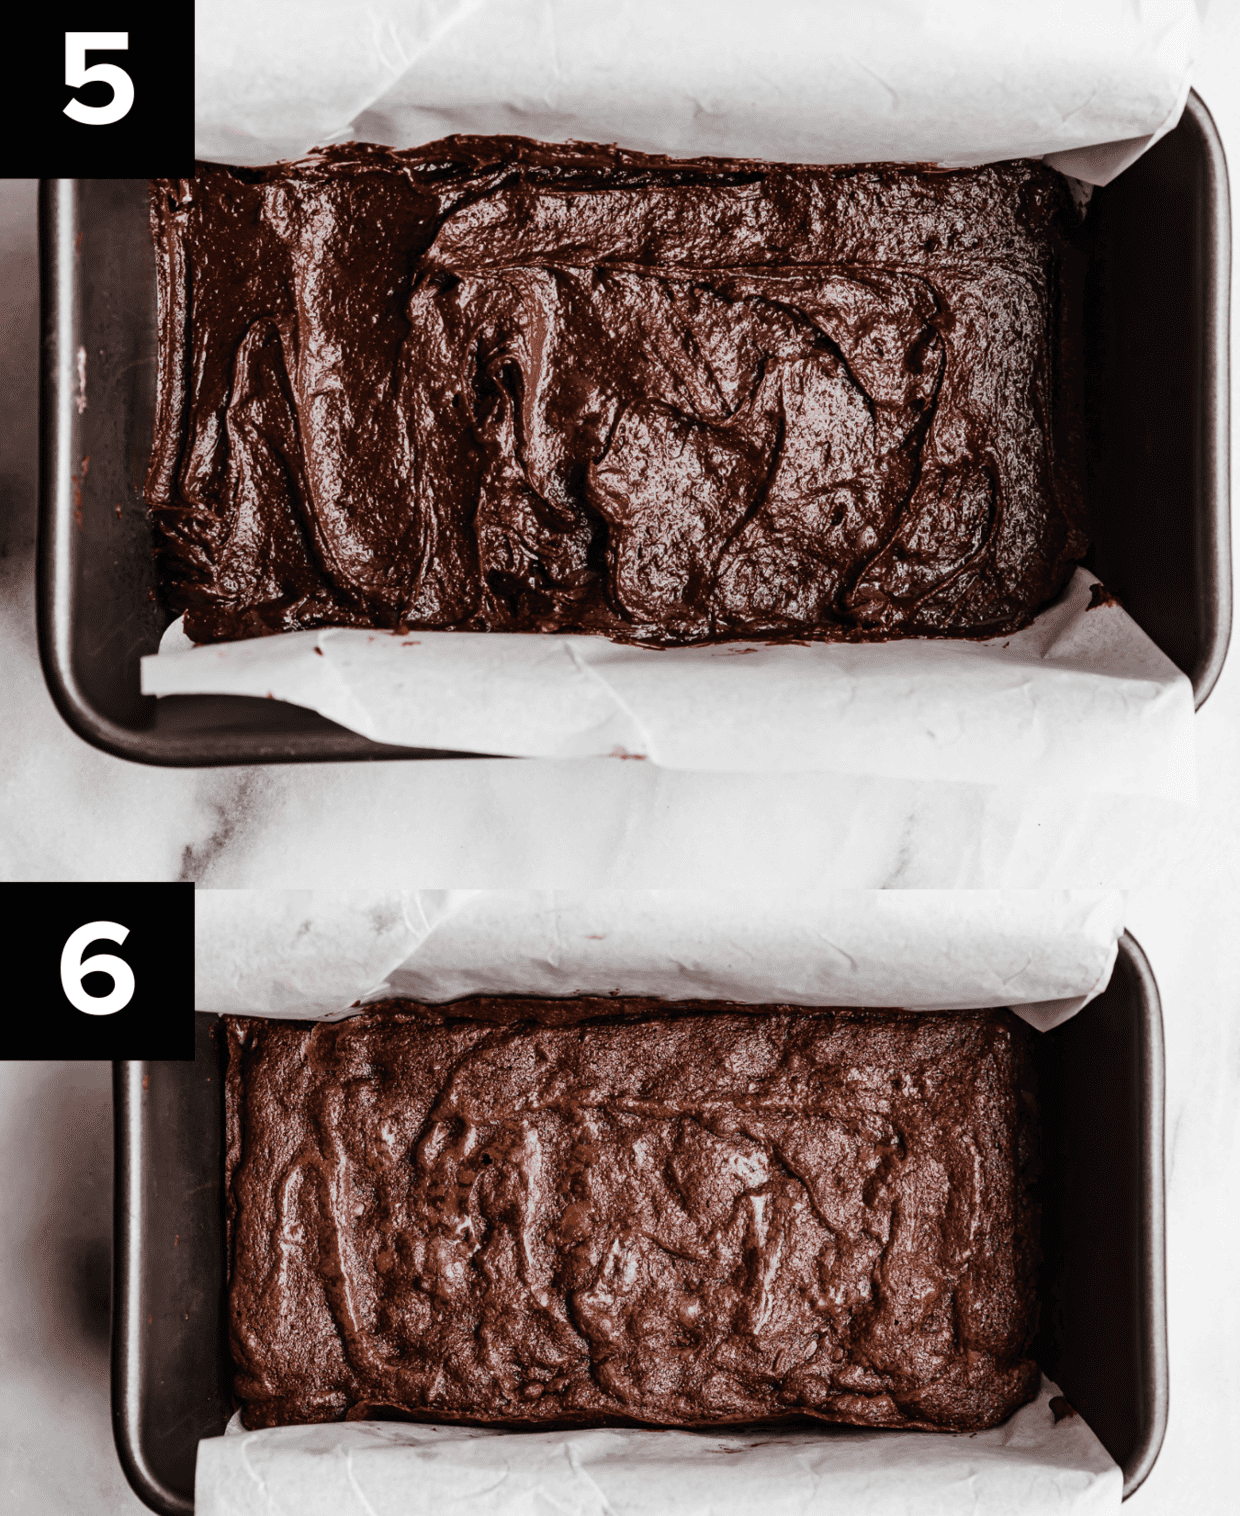 Two photos, top photo is Small Batch Brownie batter in a bread pan, bottom image is baked Small Batch Brownies in a bread pan.